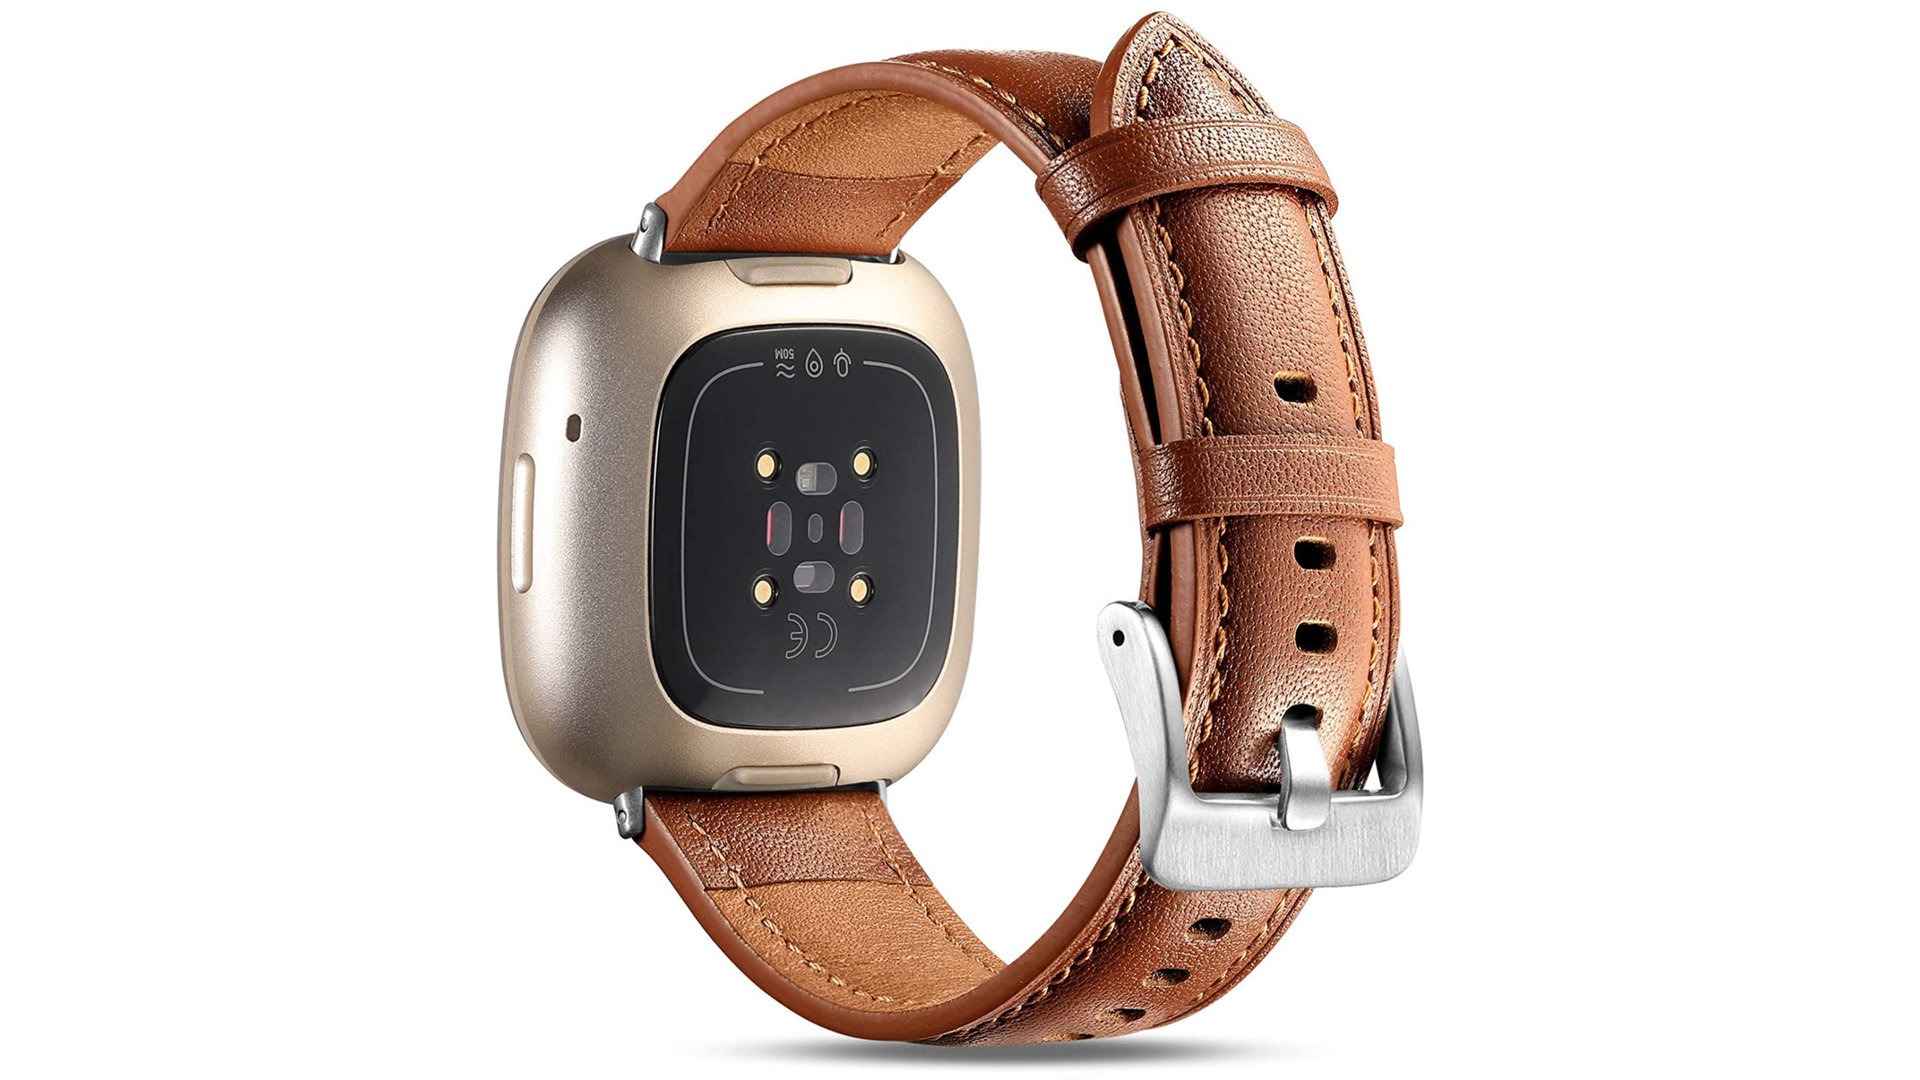 A Maledan leather band represents the best leather replacement band for a Fitbit Sense 2, in tan leather.